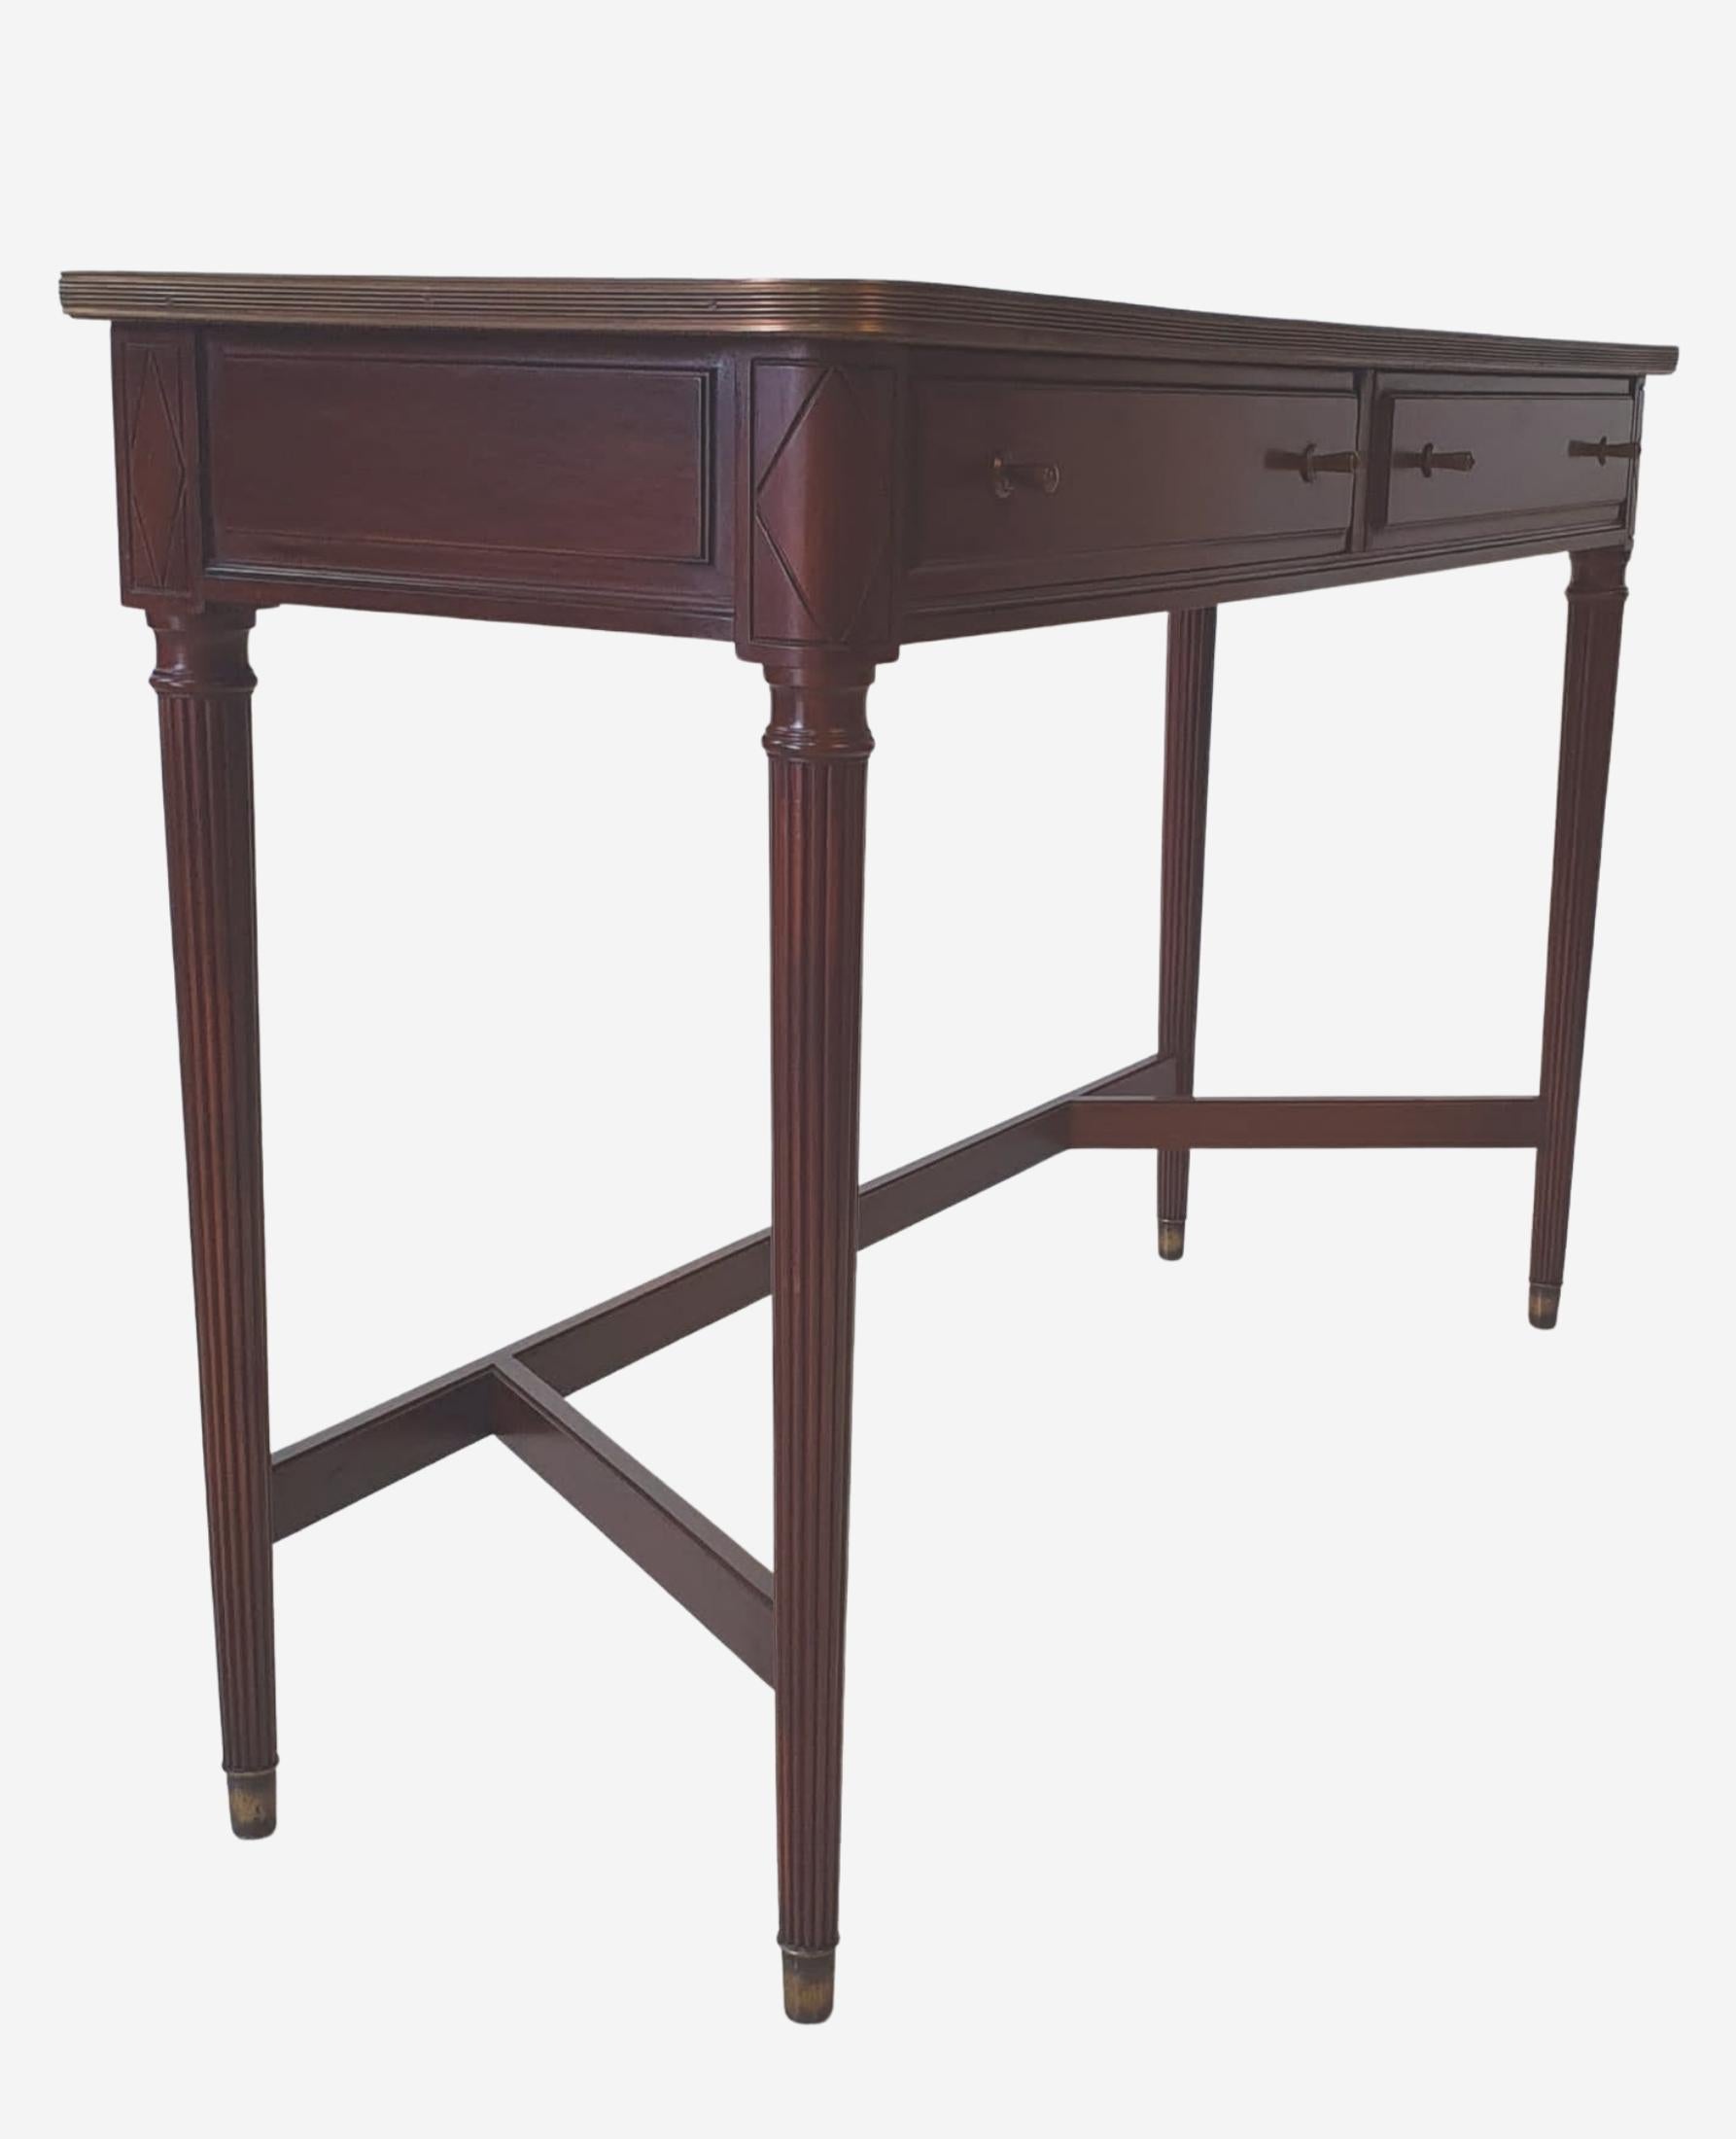 Stunning pair of Twentieth Century mahogany console tables. The figured mahogany moulded tops with brass mounting raised above panelled apron with carved diamond motif and two cockbeaded drawers with brass pulls to the fore supported on turned and